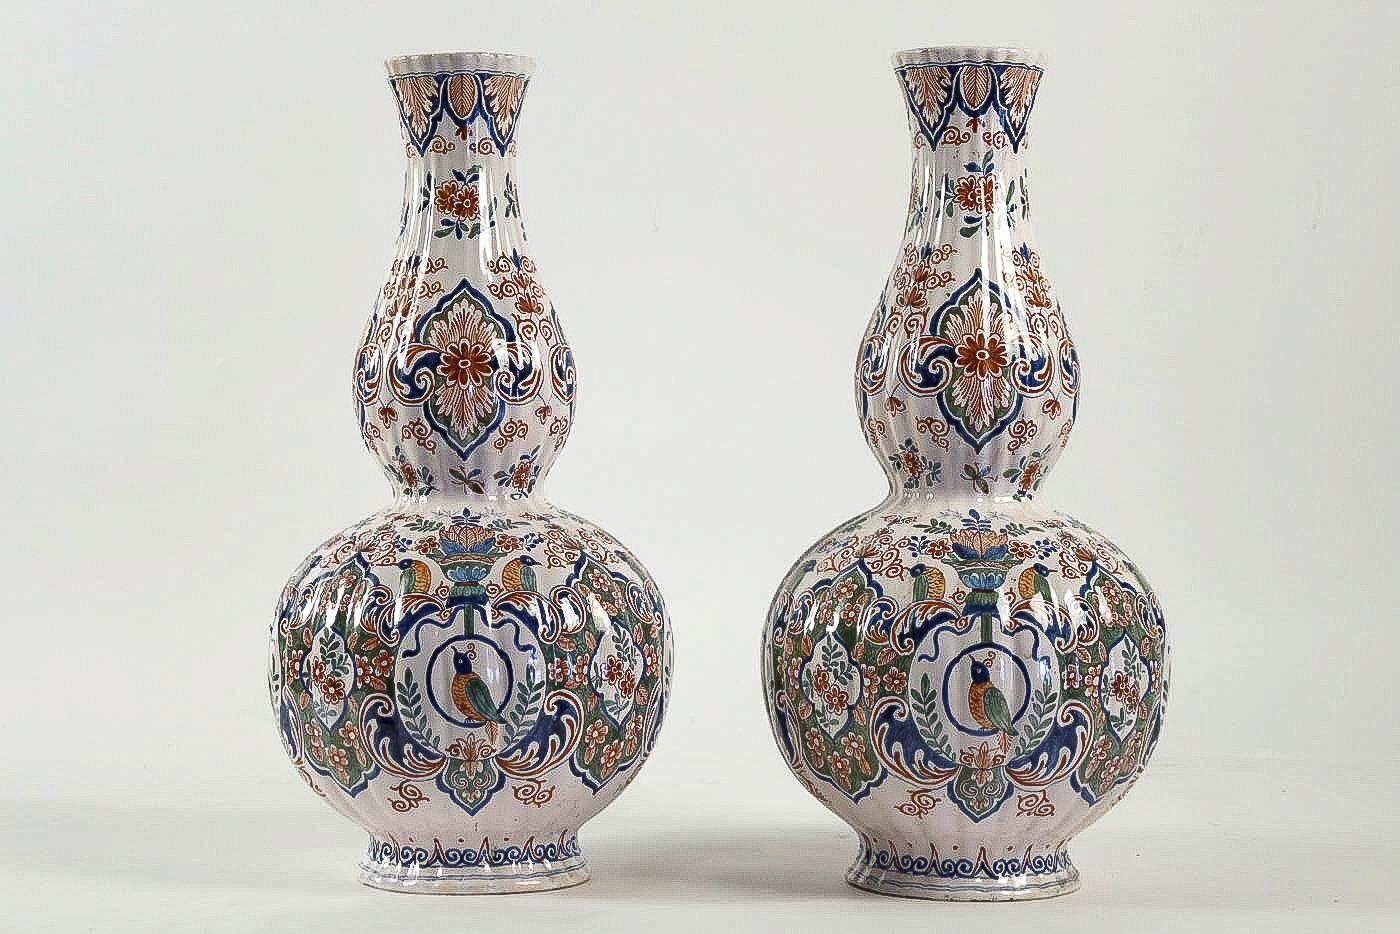 We are pleased to present you, a beautiful and rare Delft faience polychrome pair of gourd-shaped vases, decorated with hand-painted stylized flowers, Lotus flowers end birds, opaque tin glazes that made in Delft 18th century.

Our pair of vases